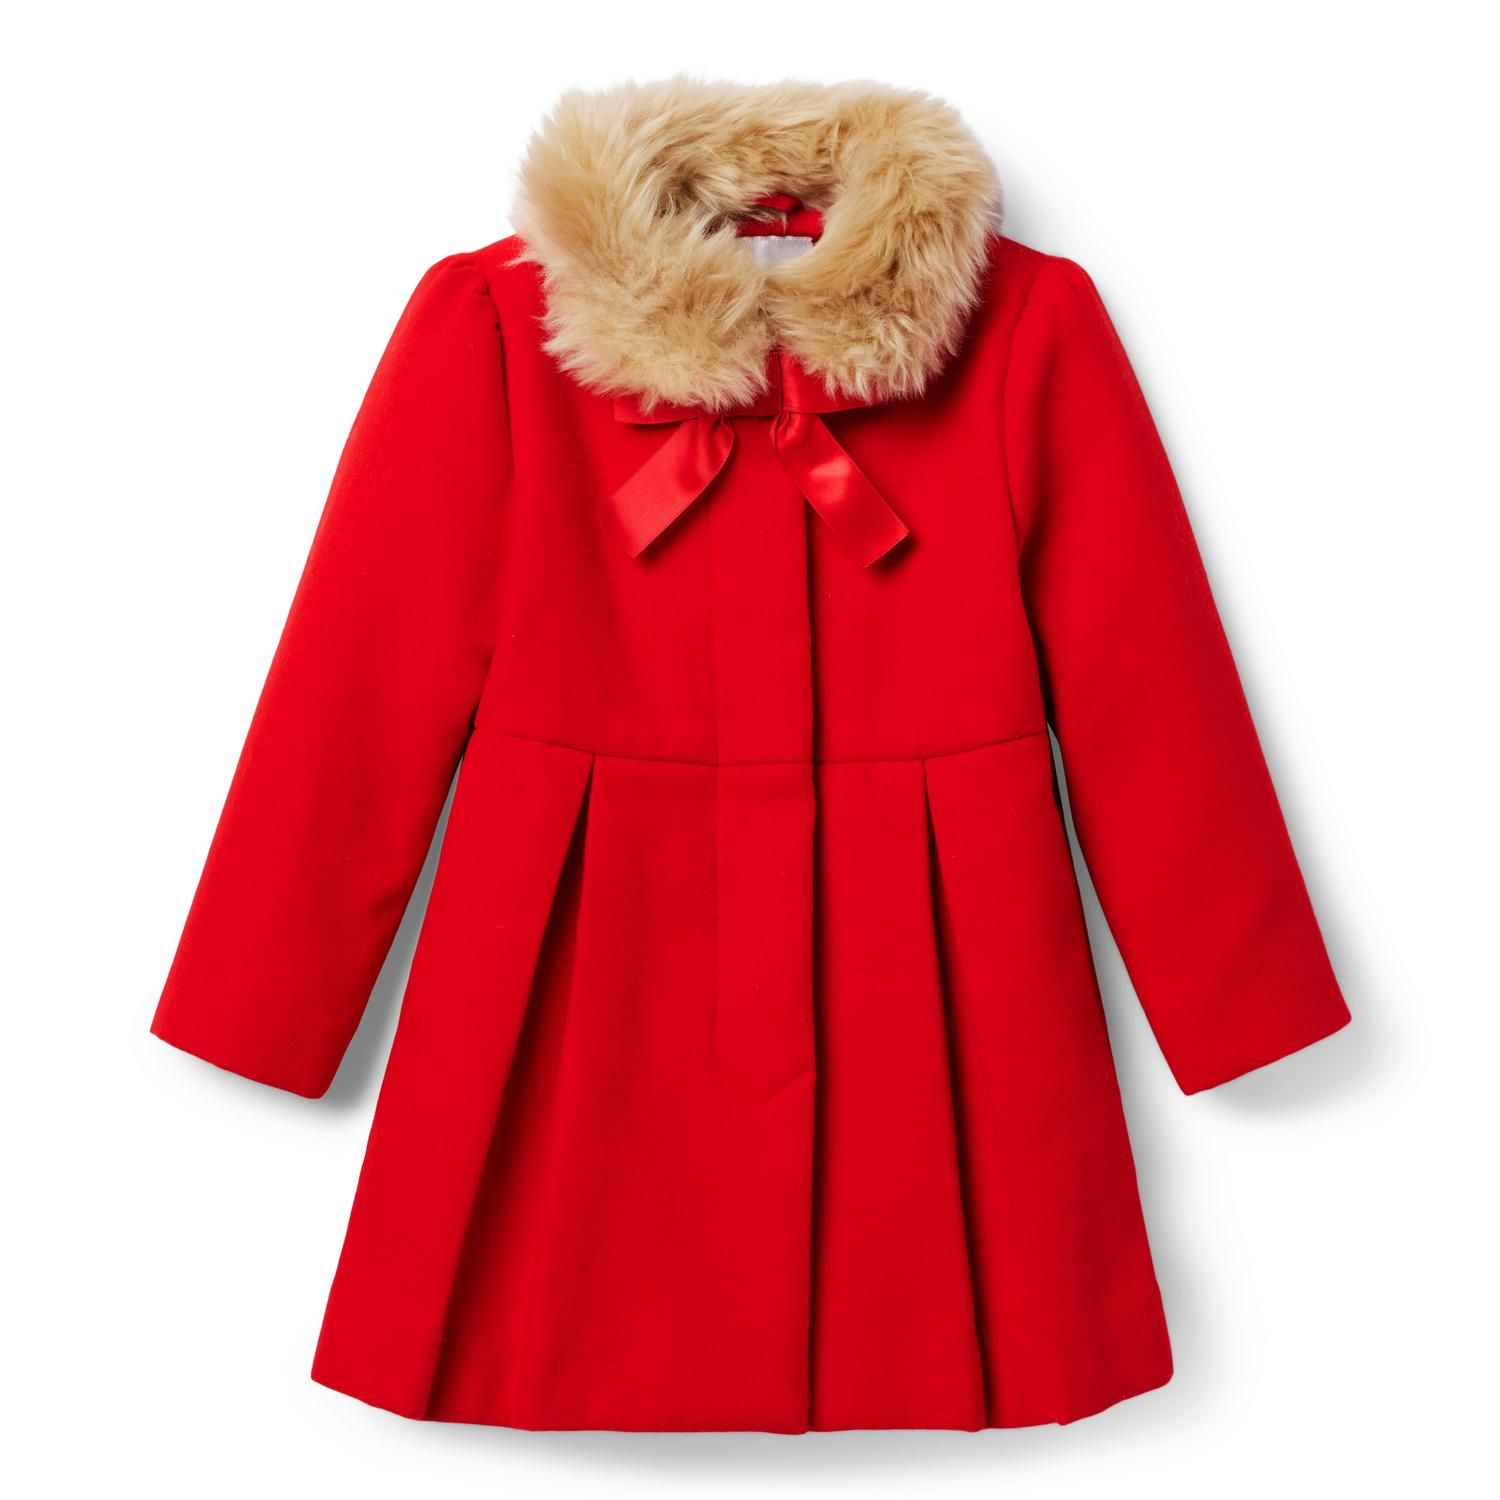 The Holiday Bow Coat | Janie and Jack